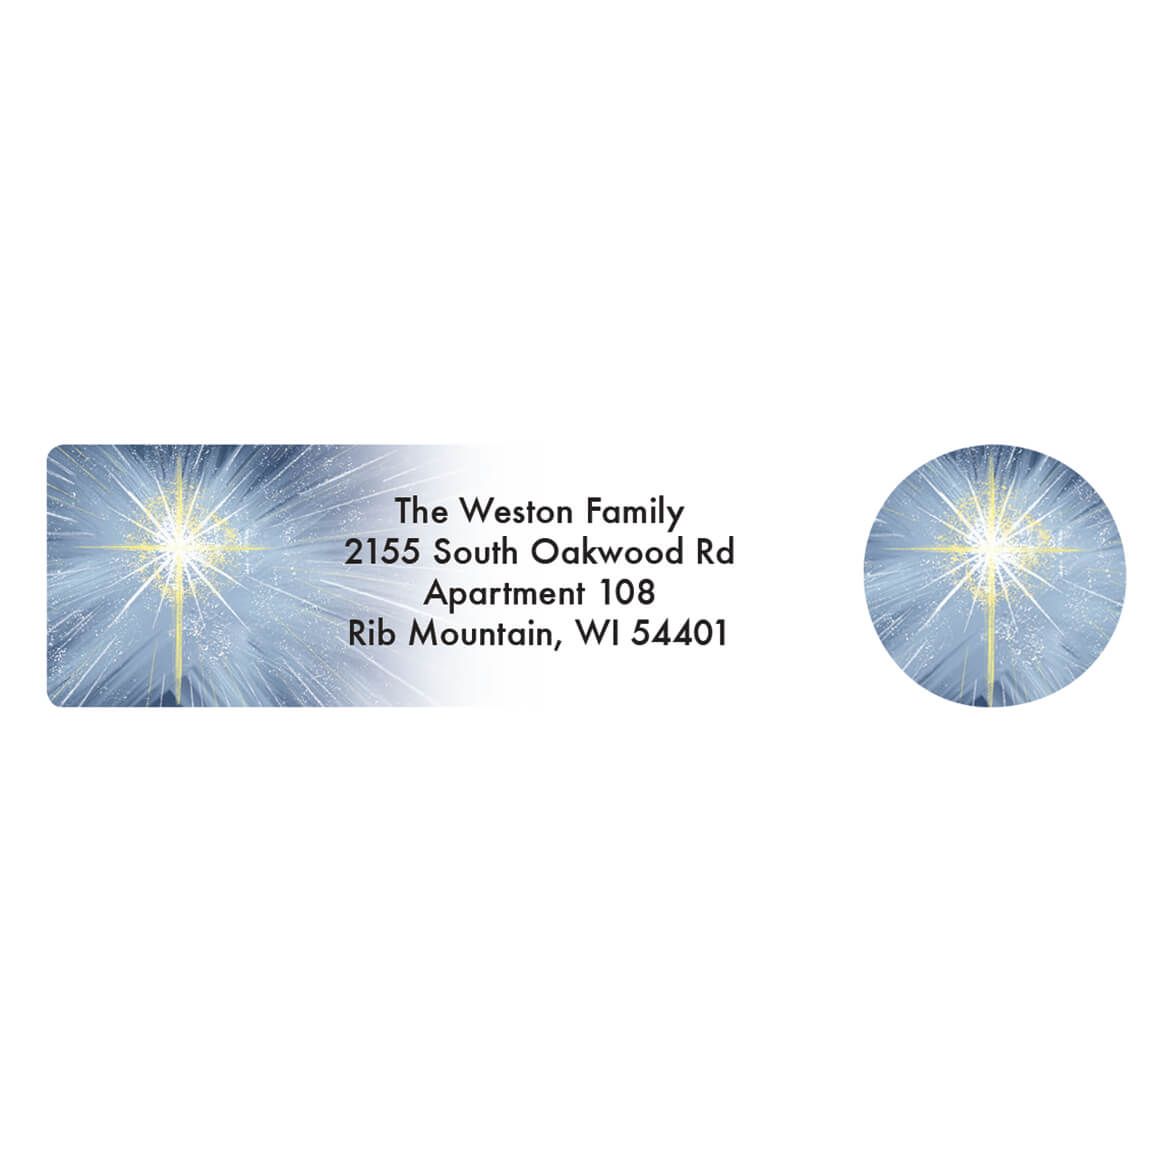 Personalized Heaven's Gift Address Labels & Envelope Seals 20 + '-' + 364753